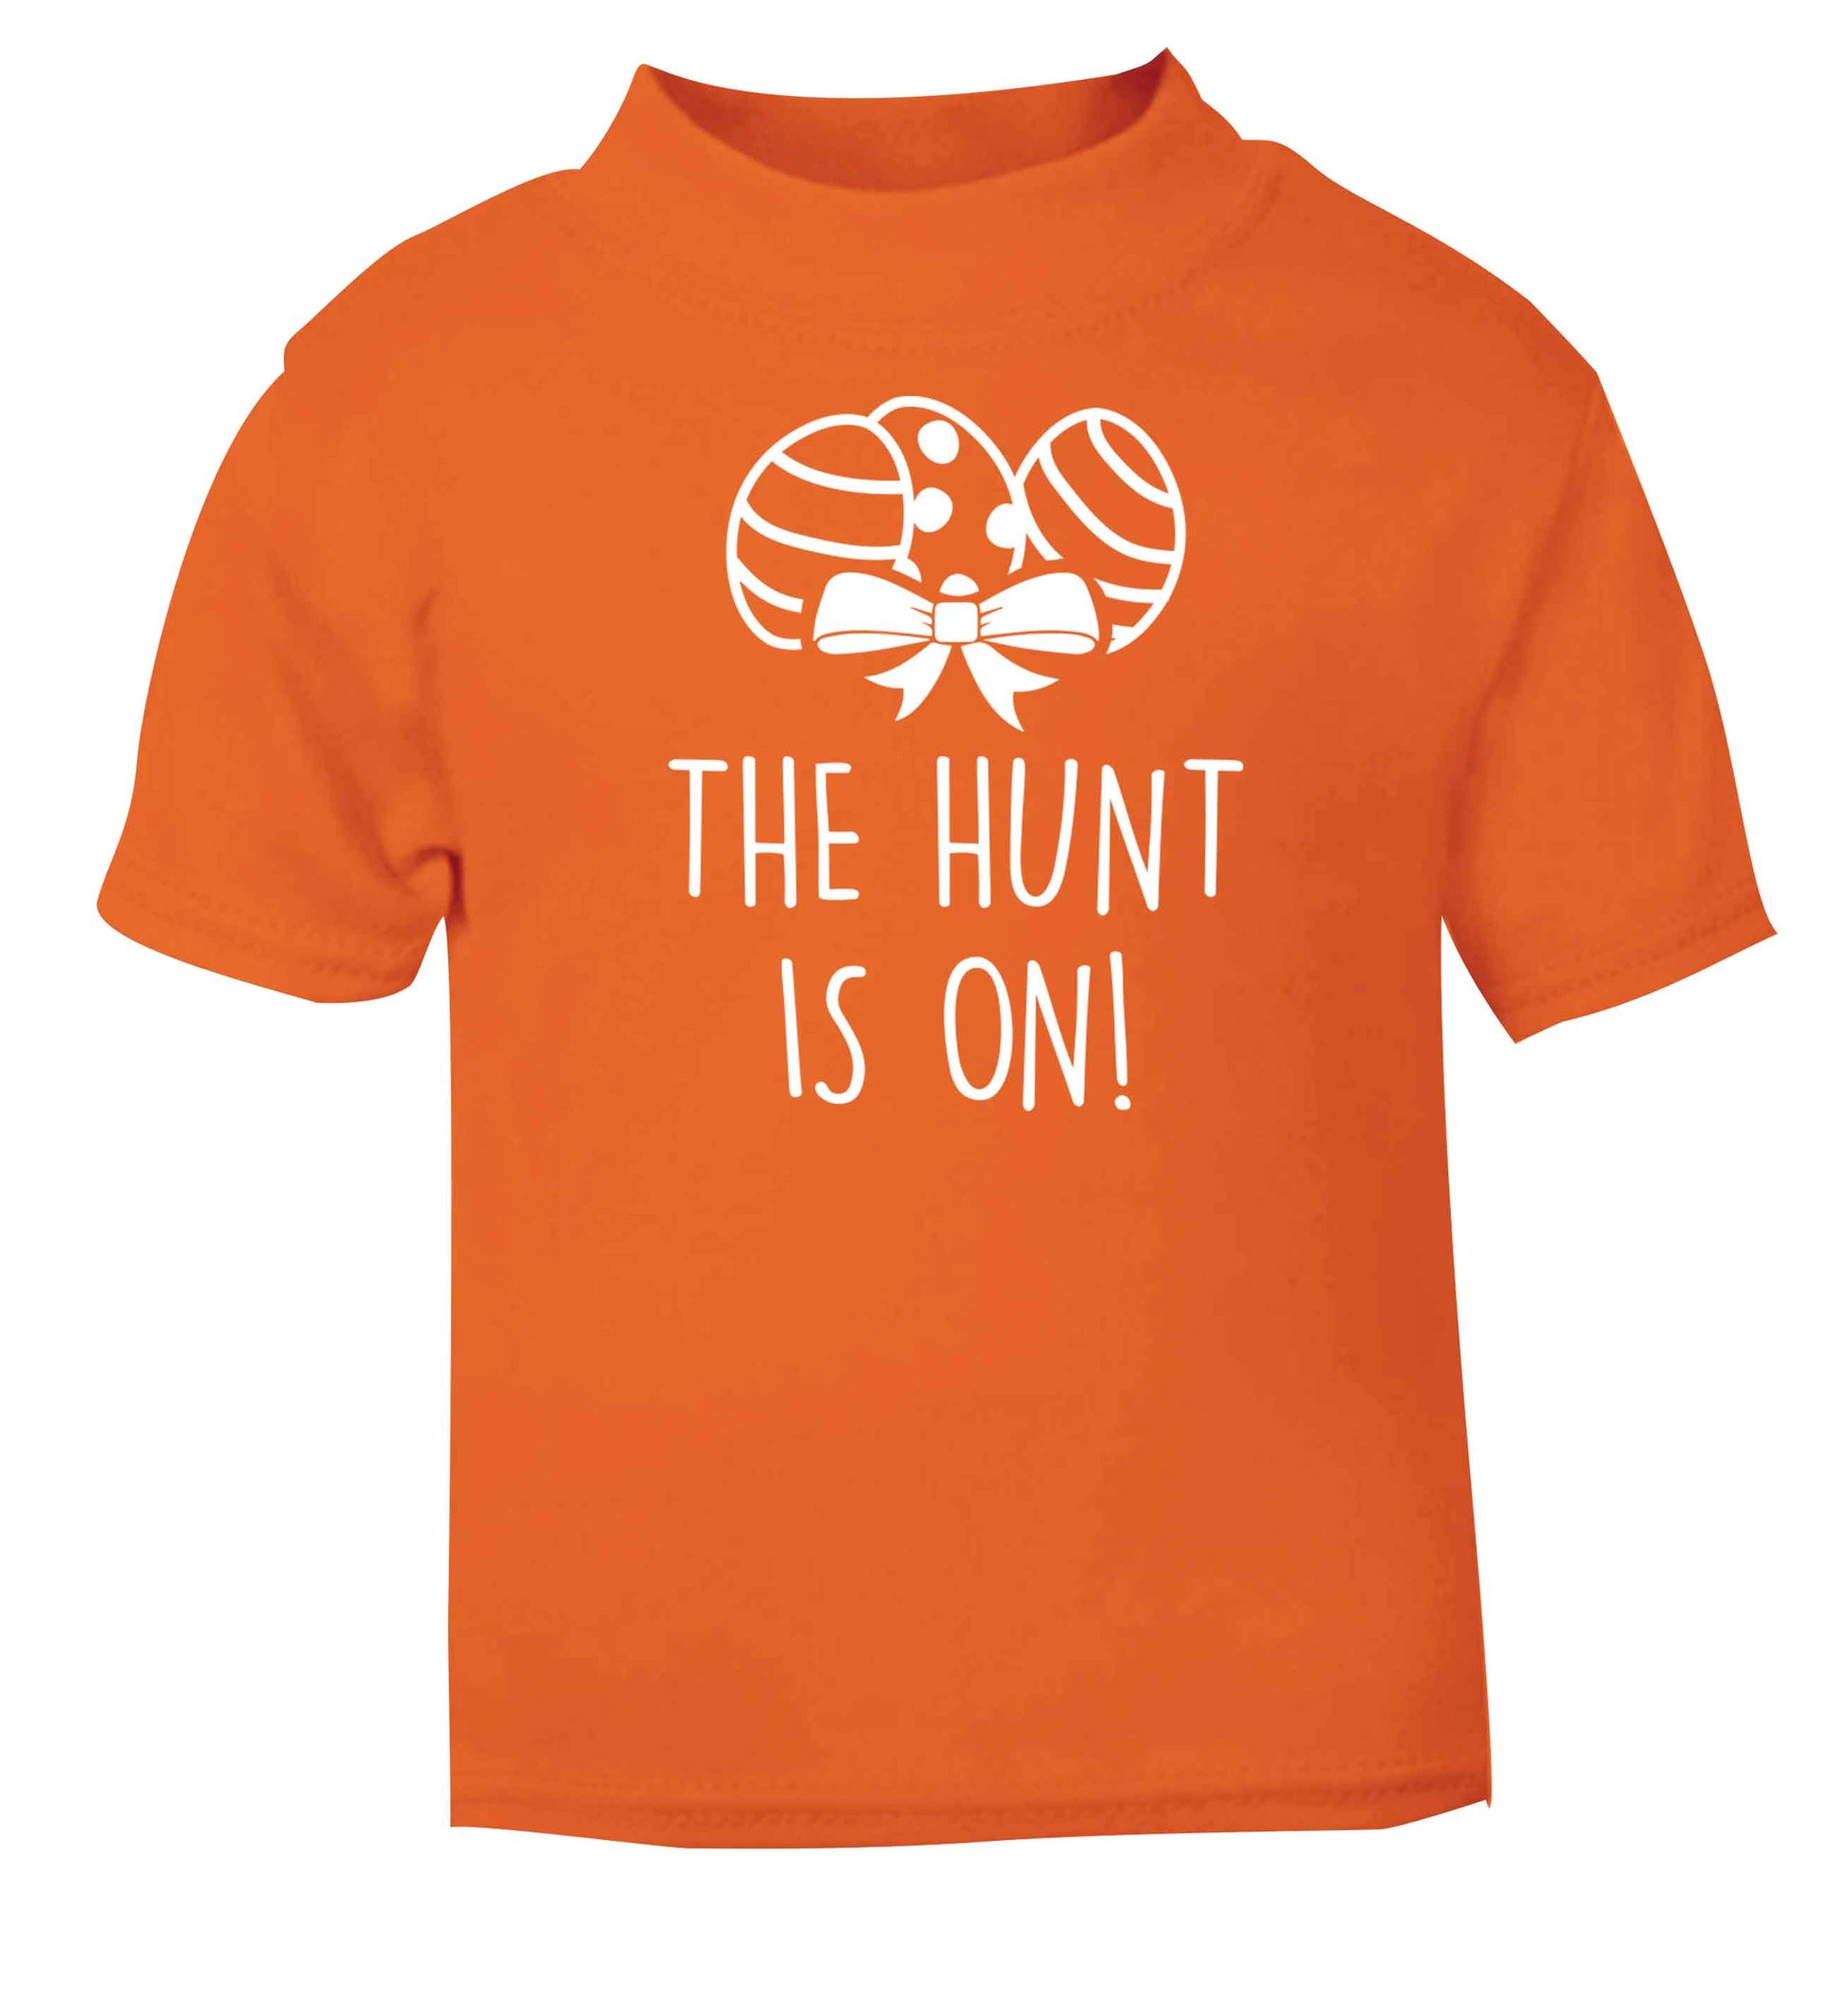 The hunt is on orange baby toddler Tshirt 2 Years